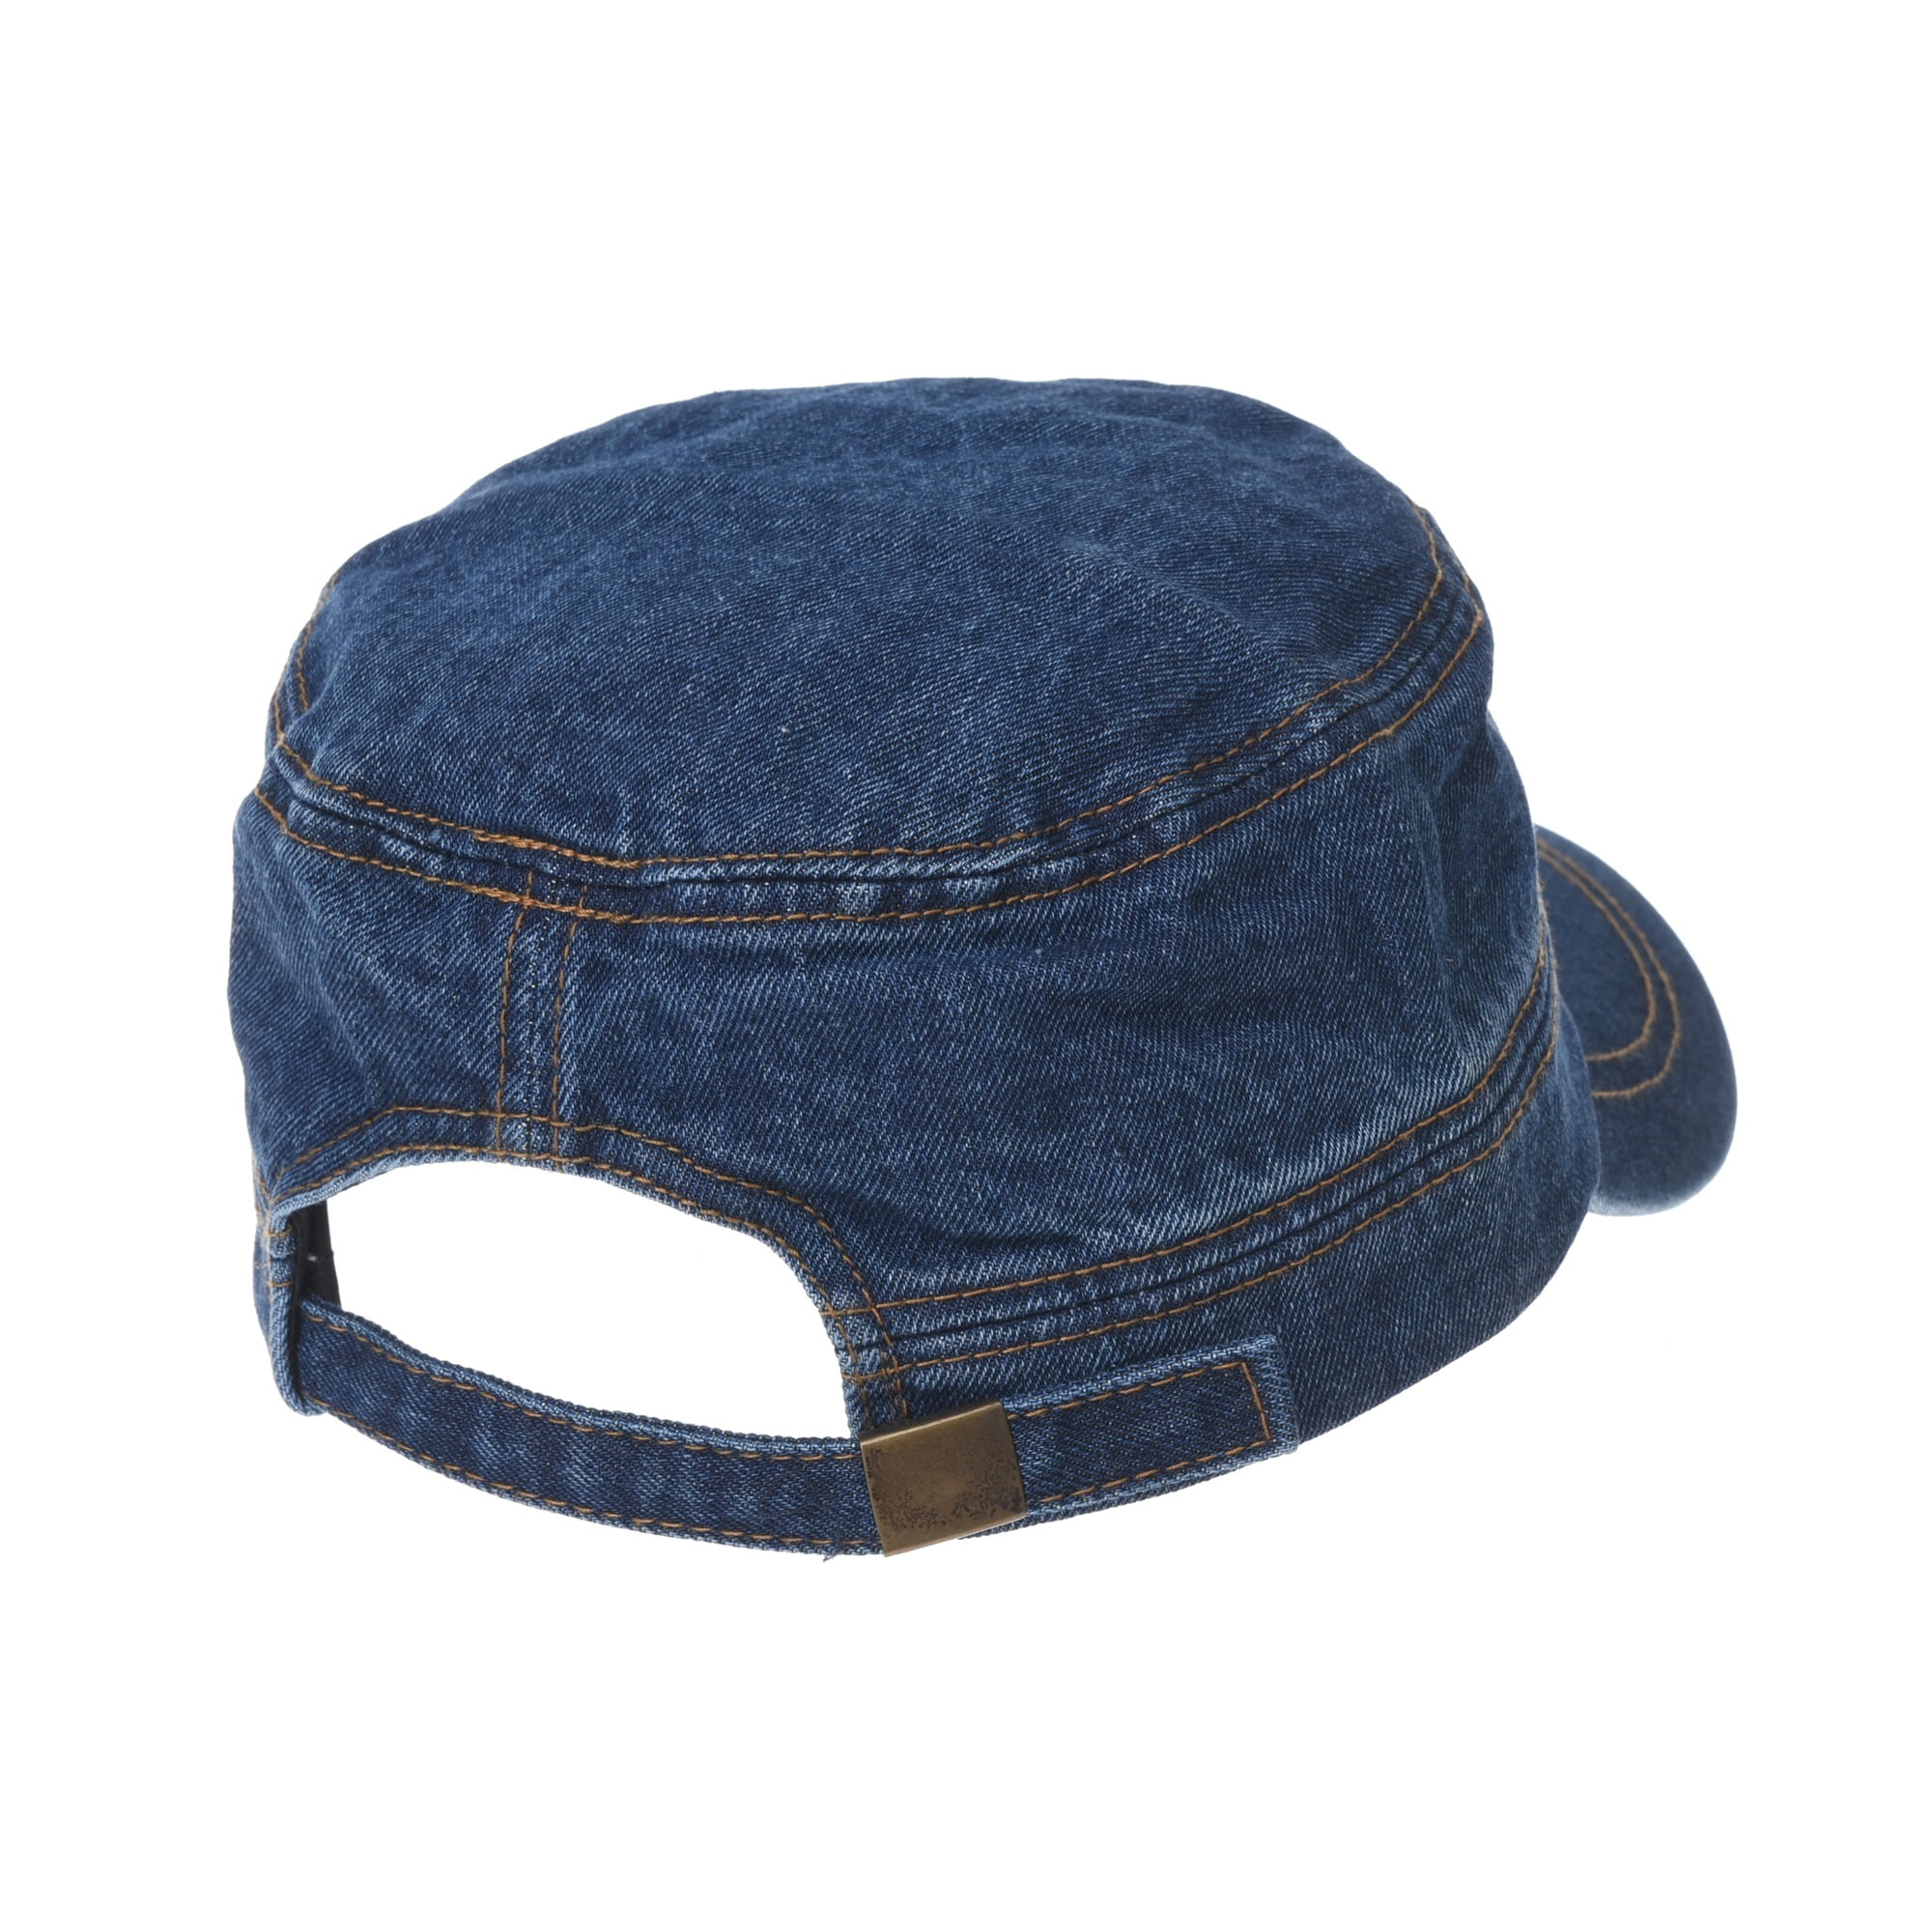 WITHMOONS Army Denim Cadet Cap Cotton Jean Stitch Washed 